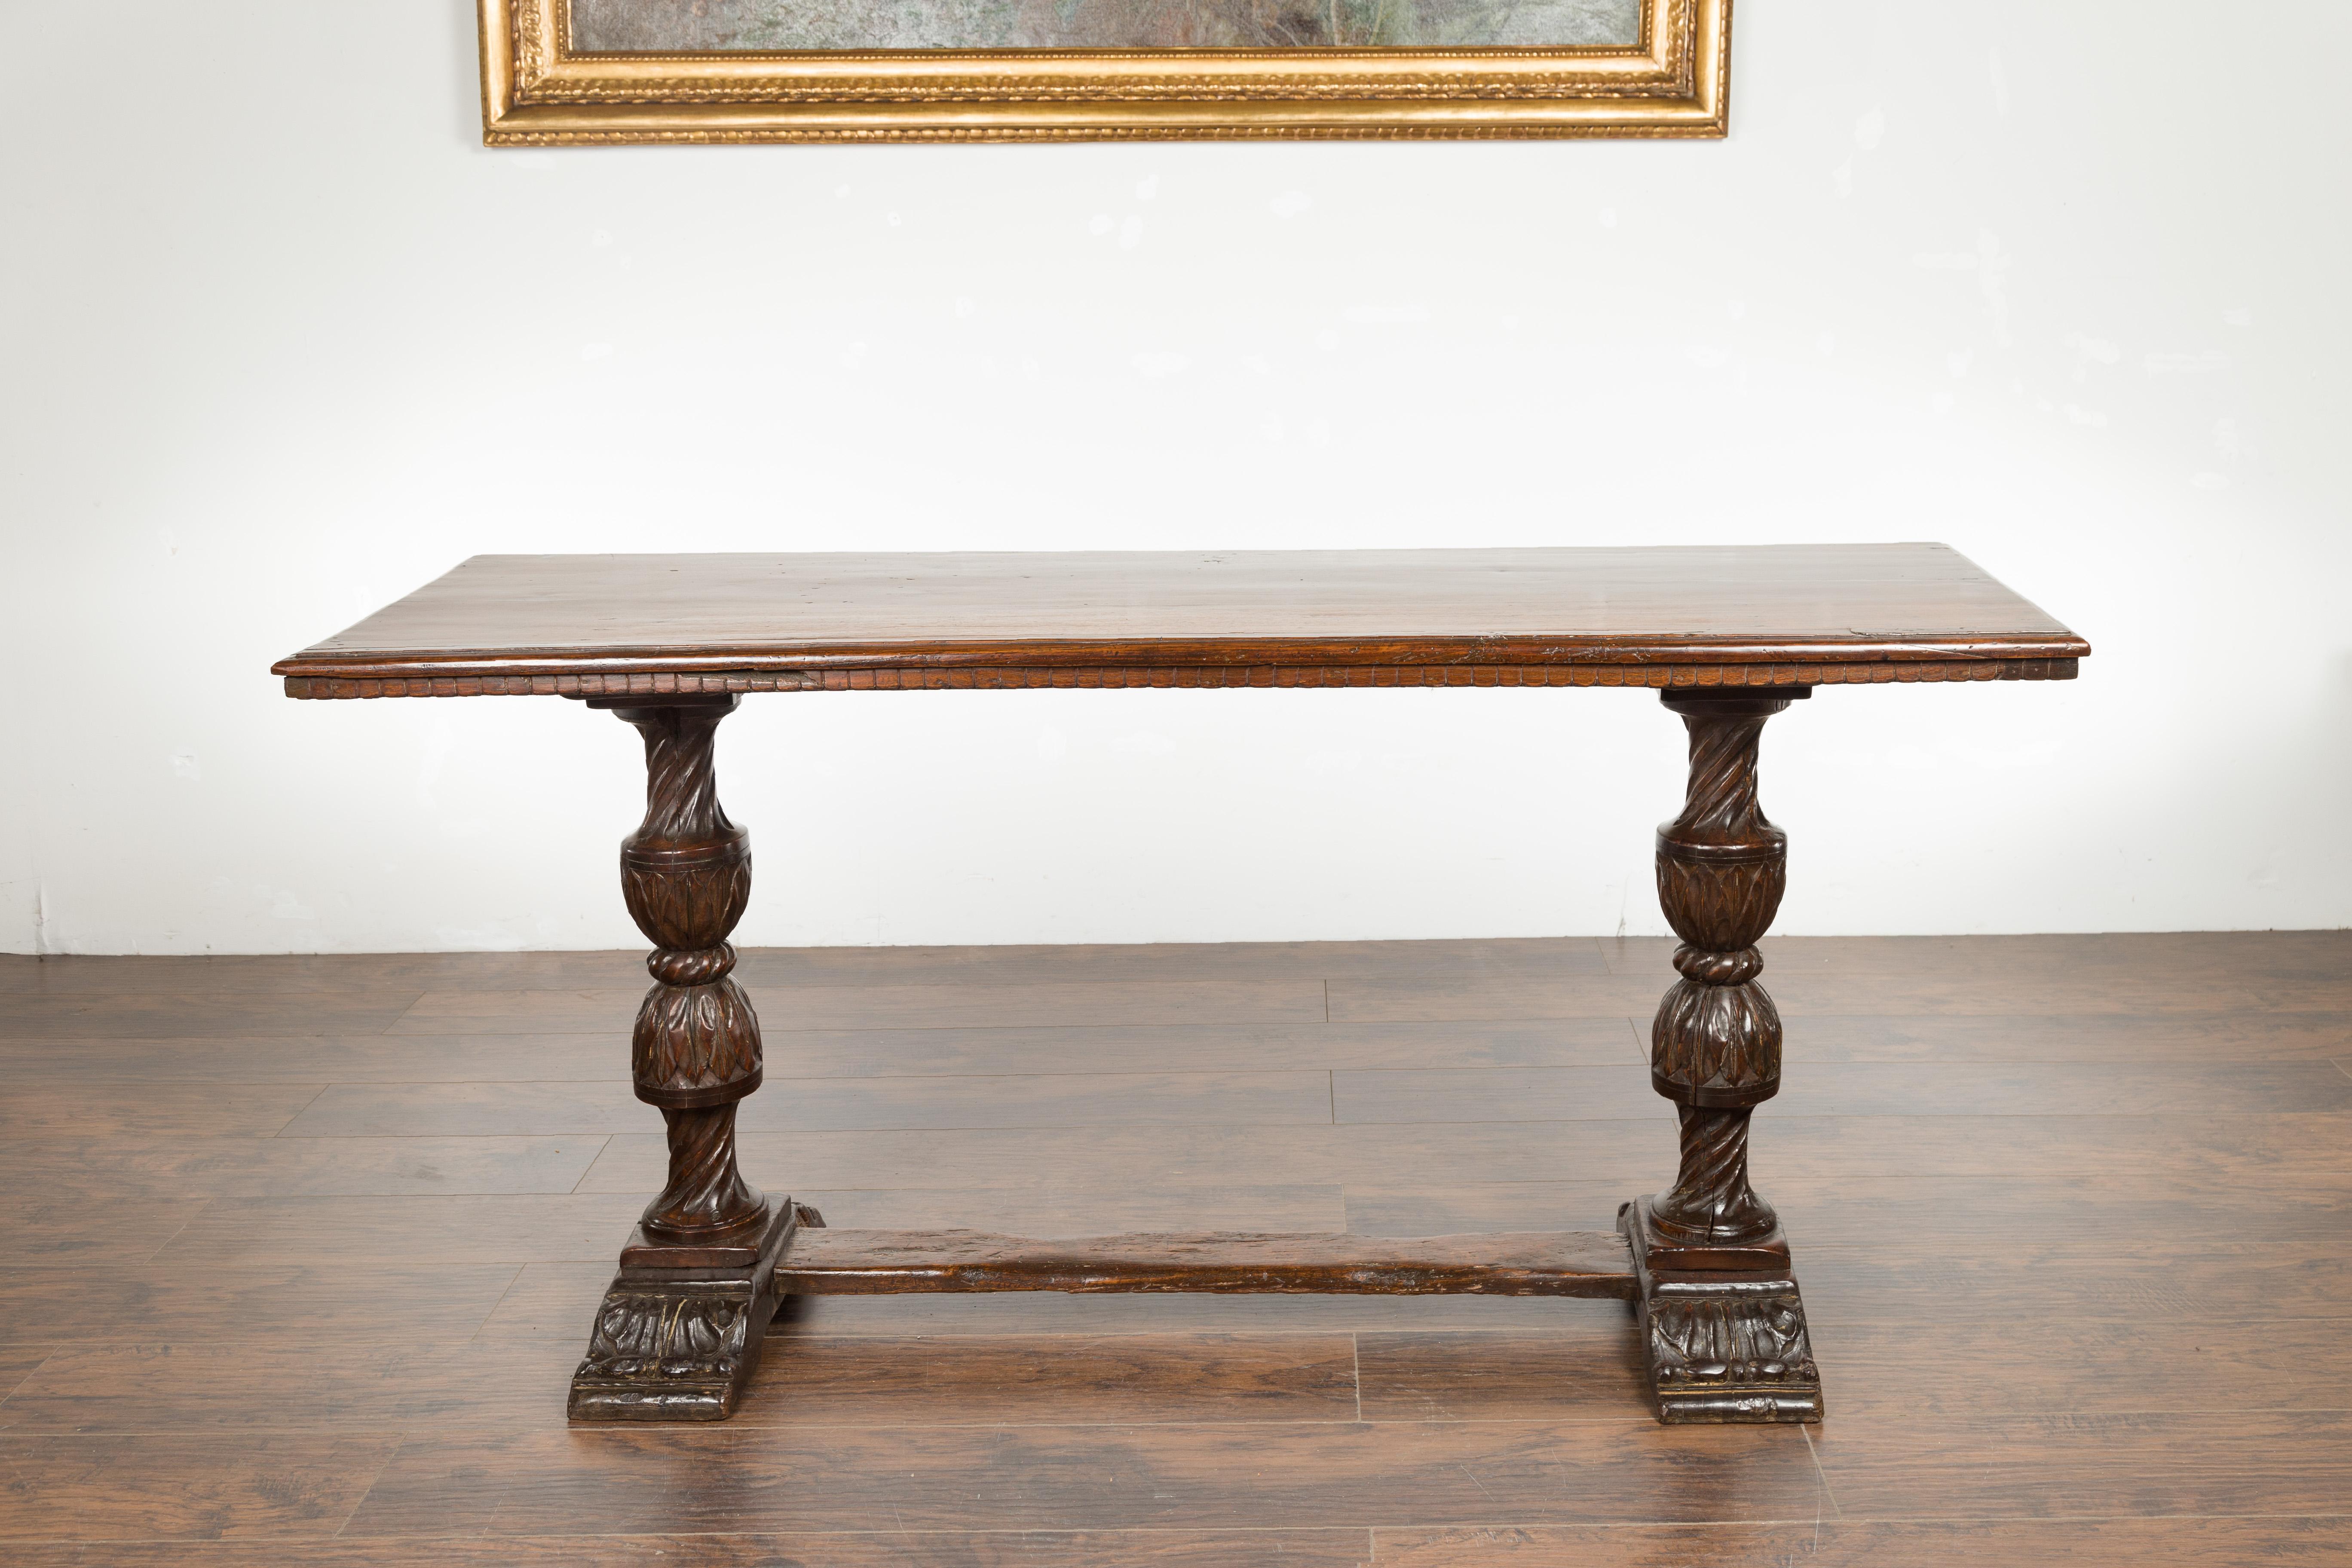 Italian 1820s Walnut Table with Carved Legs, Twisted Motifs and Waterleaves For Sale 14